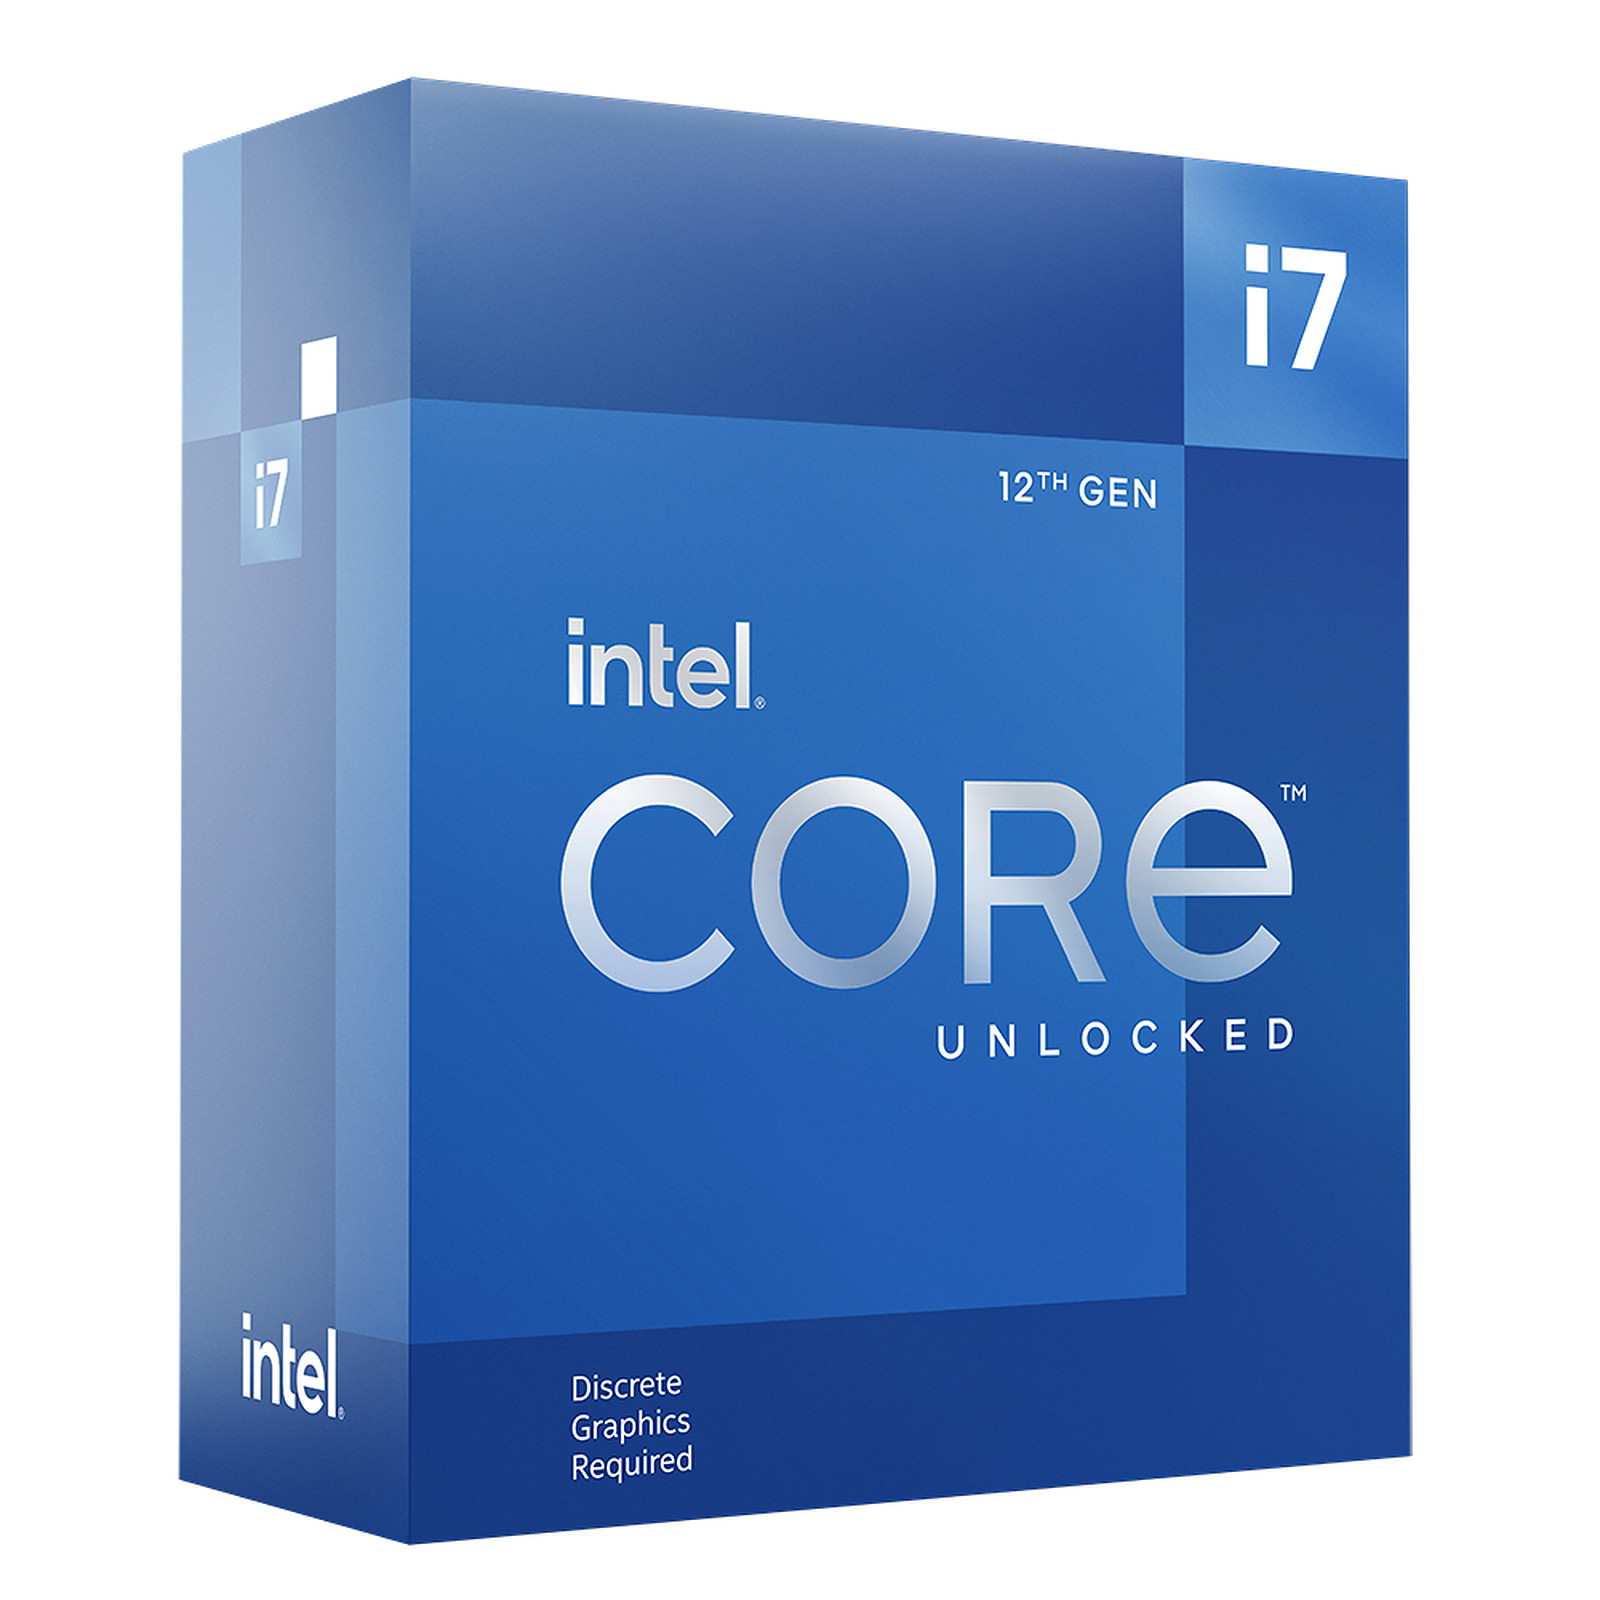 Intel Core i7-12700KF (3.6 GHz / 5.0 GHz) · Occasion - Processeur Intel - Occasion